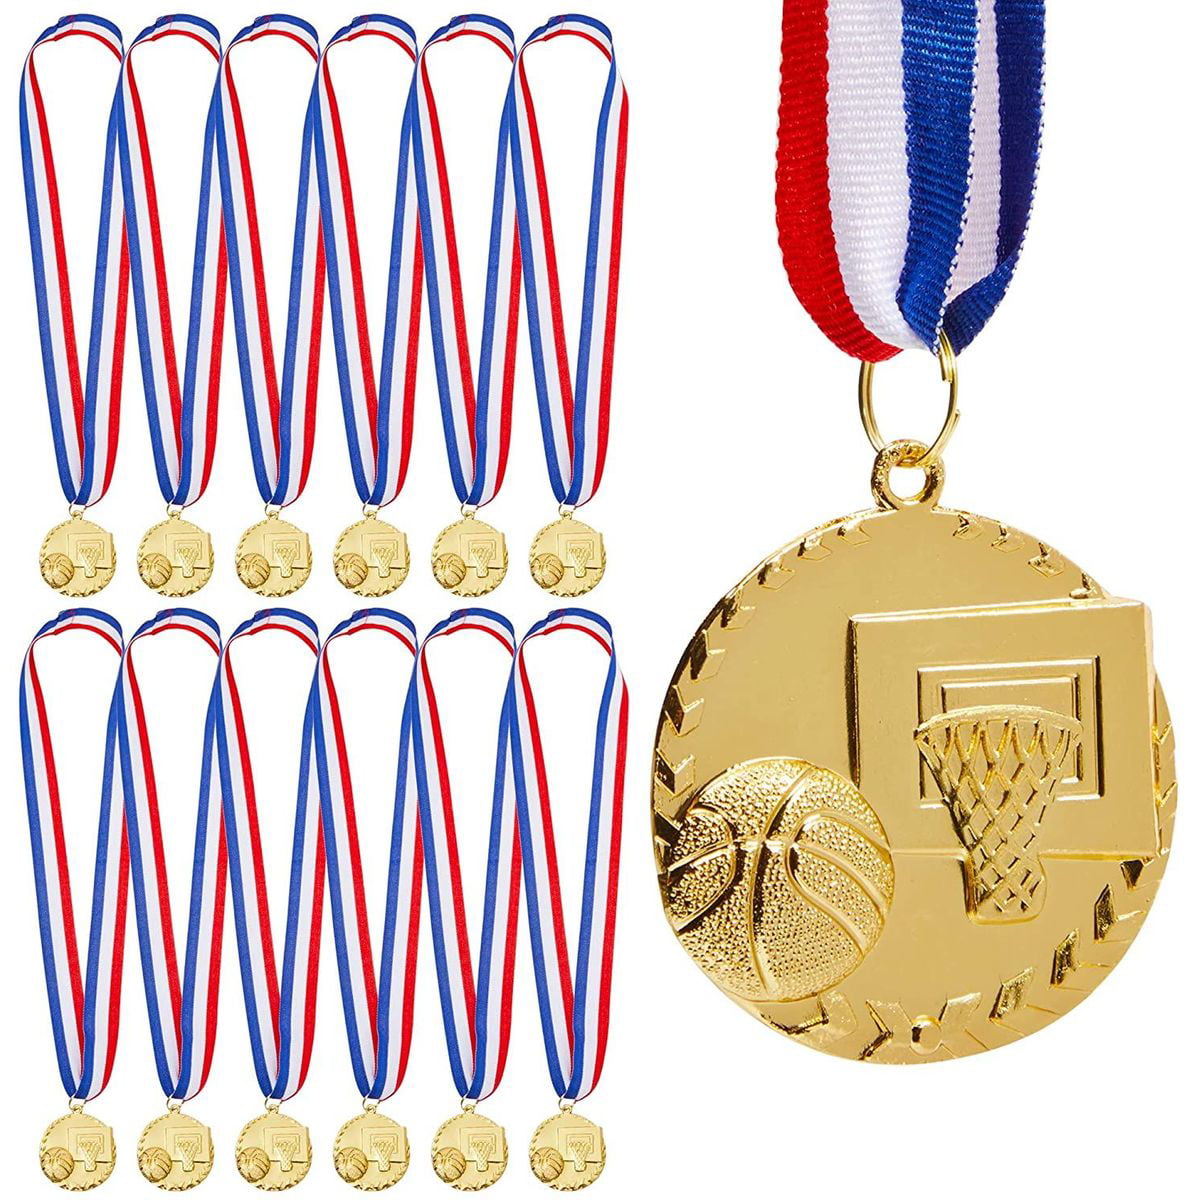 60P EACH MEDALS X 10 GOLD & SILVER  WITH FREE LANYARDS   SIZE 5.0 CM METAL 